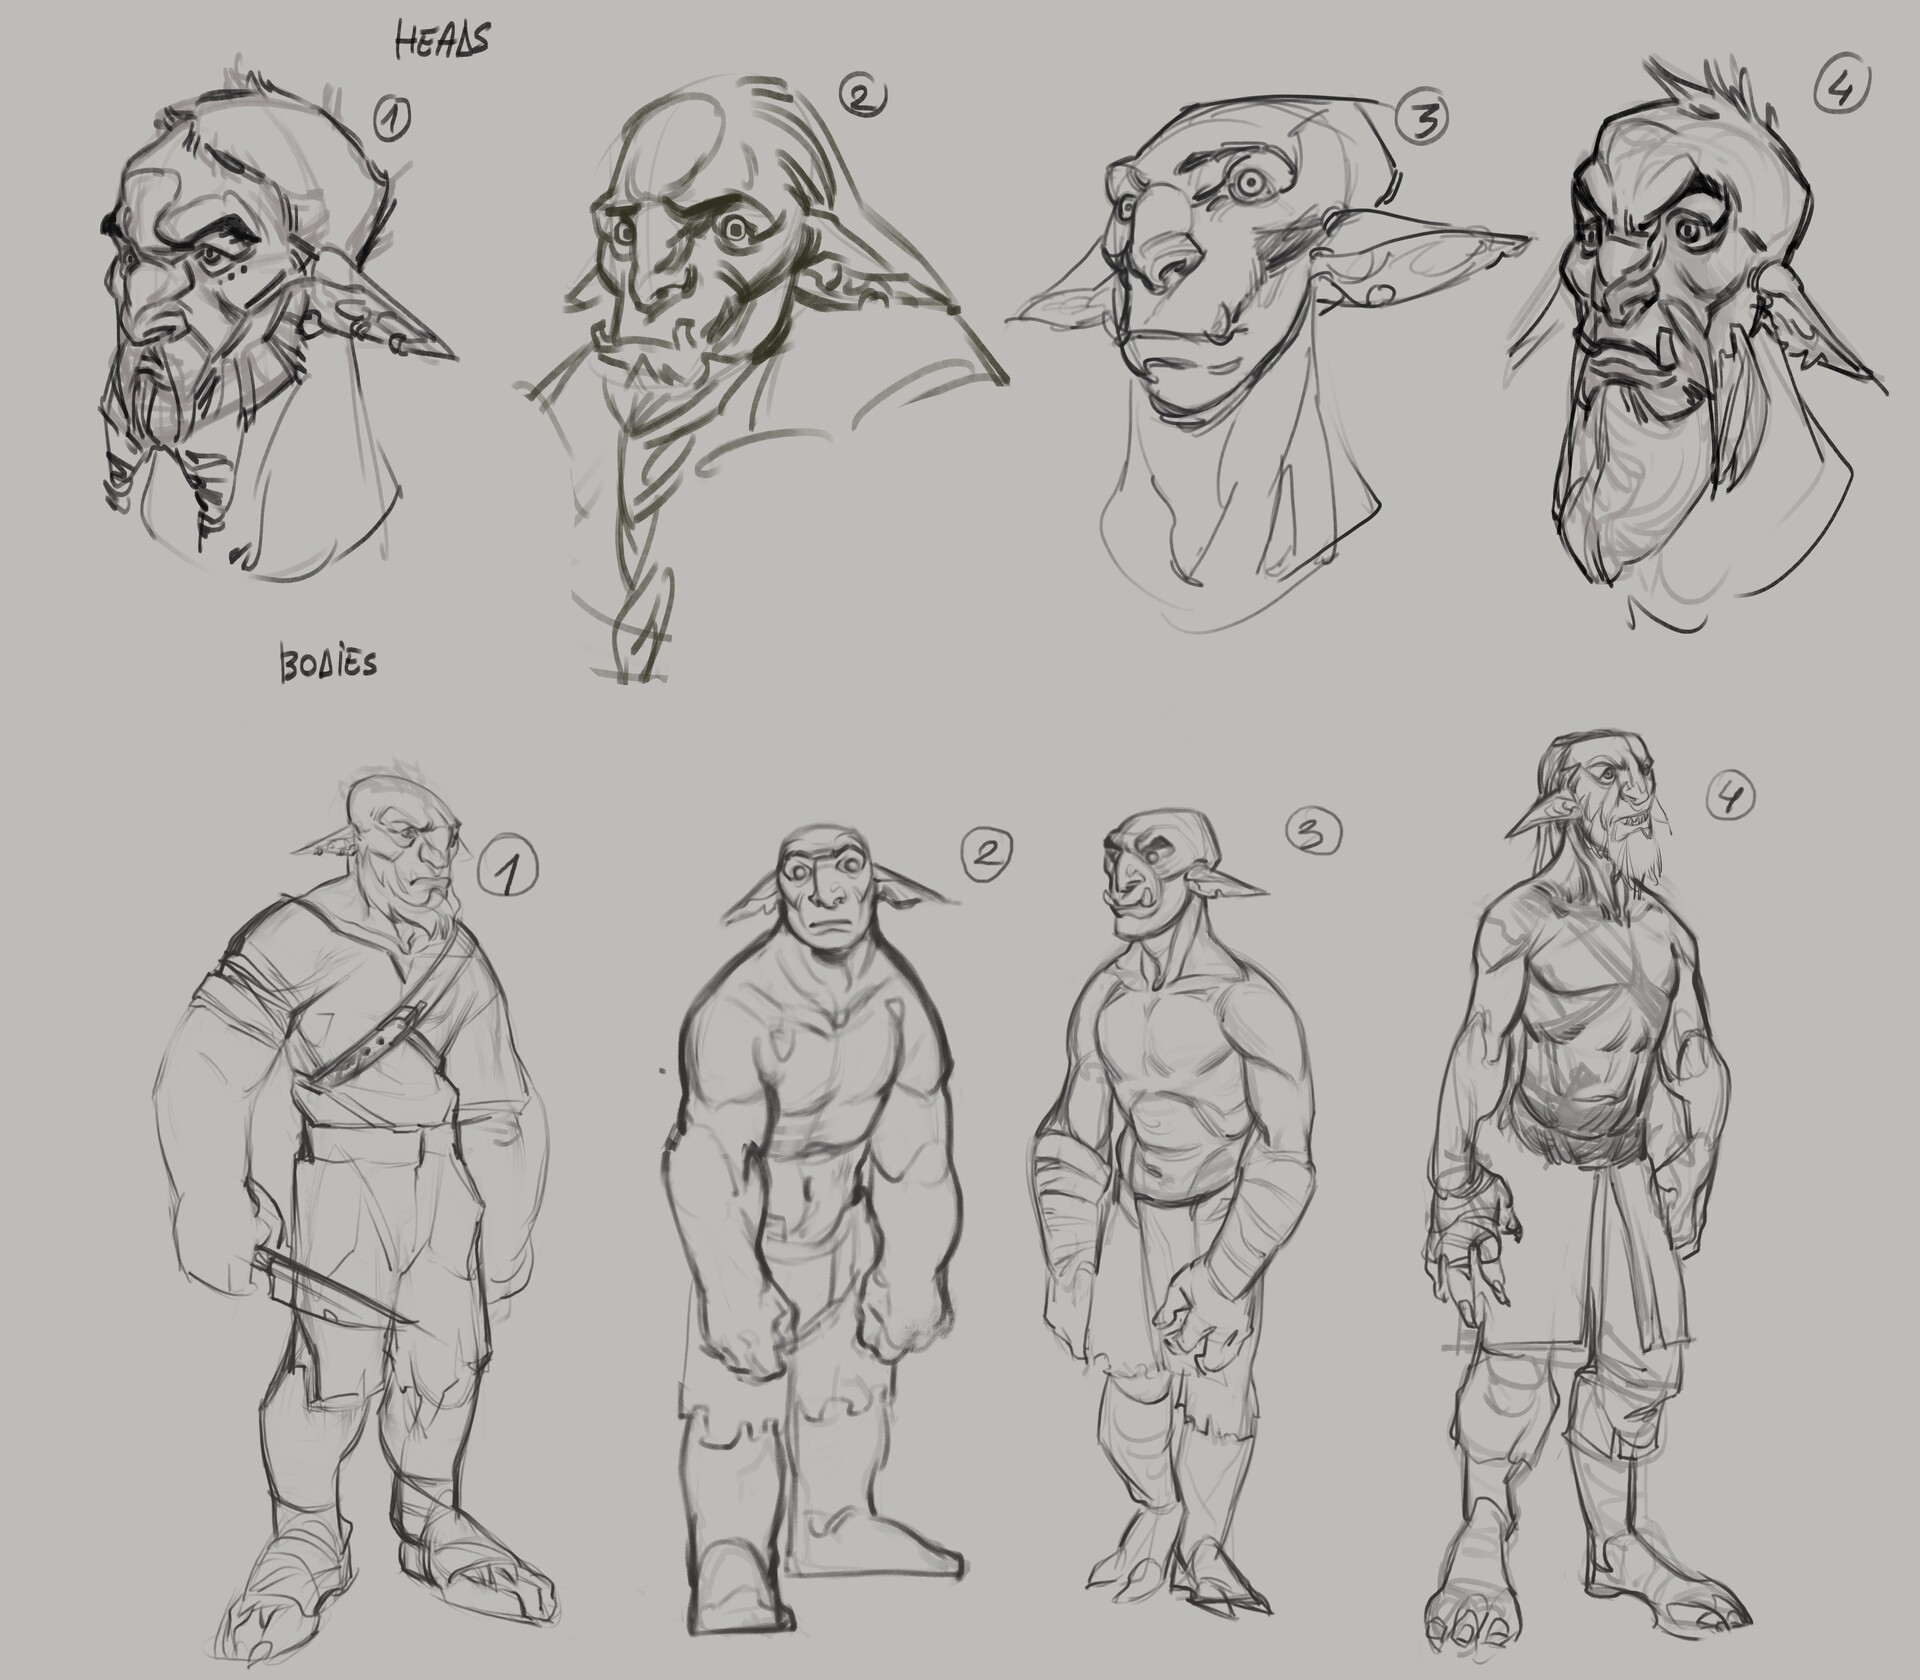 ArtStation - Early Video Game Design Explorations